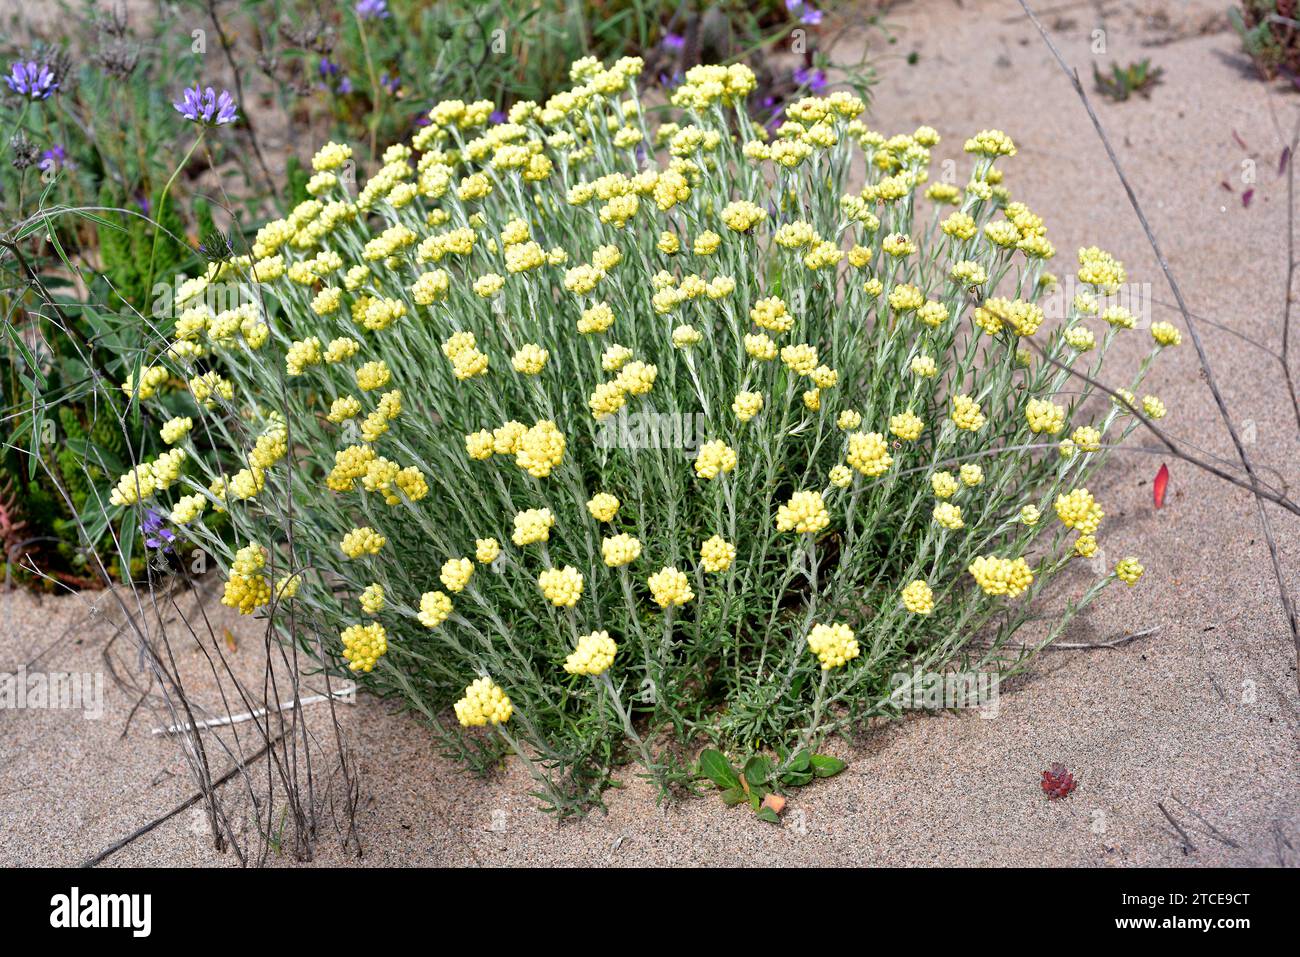 Perpetual (Helichrysum stoechas) is an annual or perennial medicinal plant native to Mediterranean basin. This photo was taken in Pals beach, Girona, Stock Photo